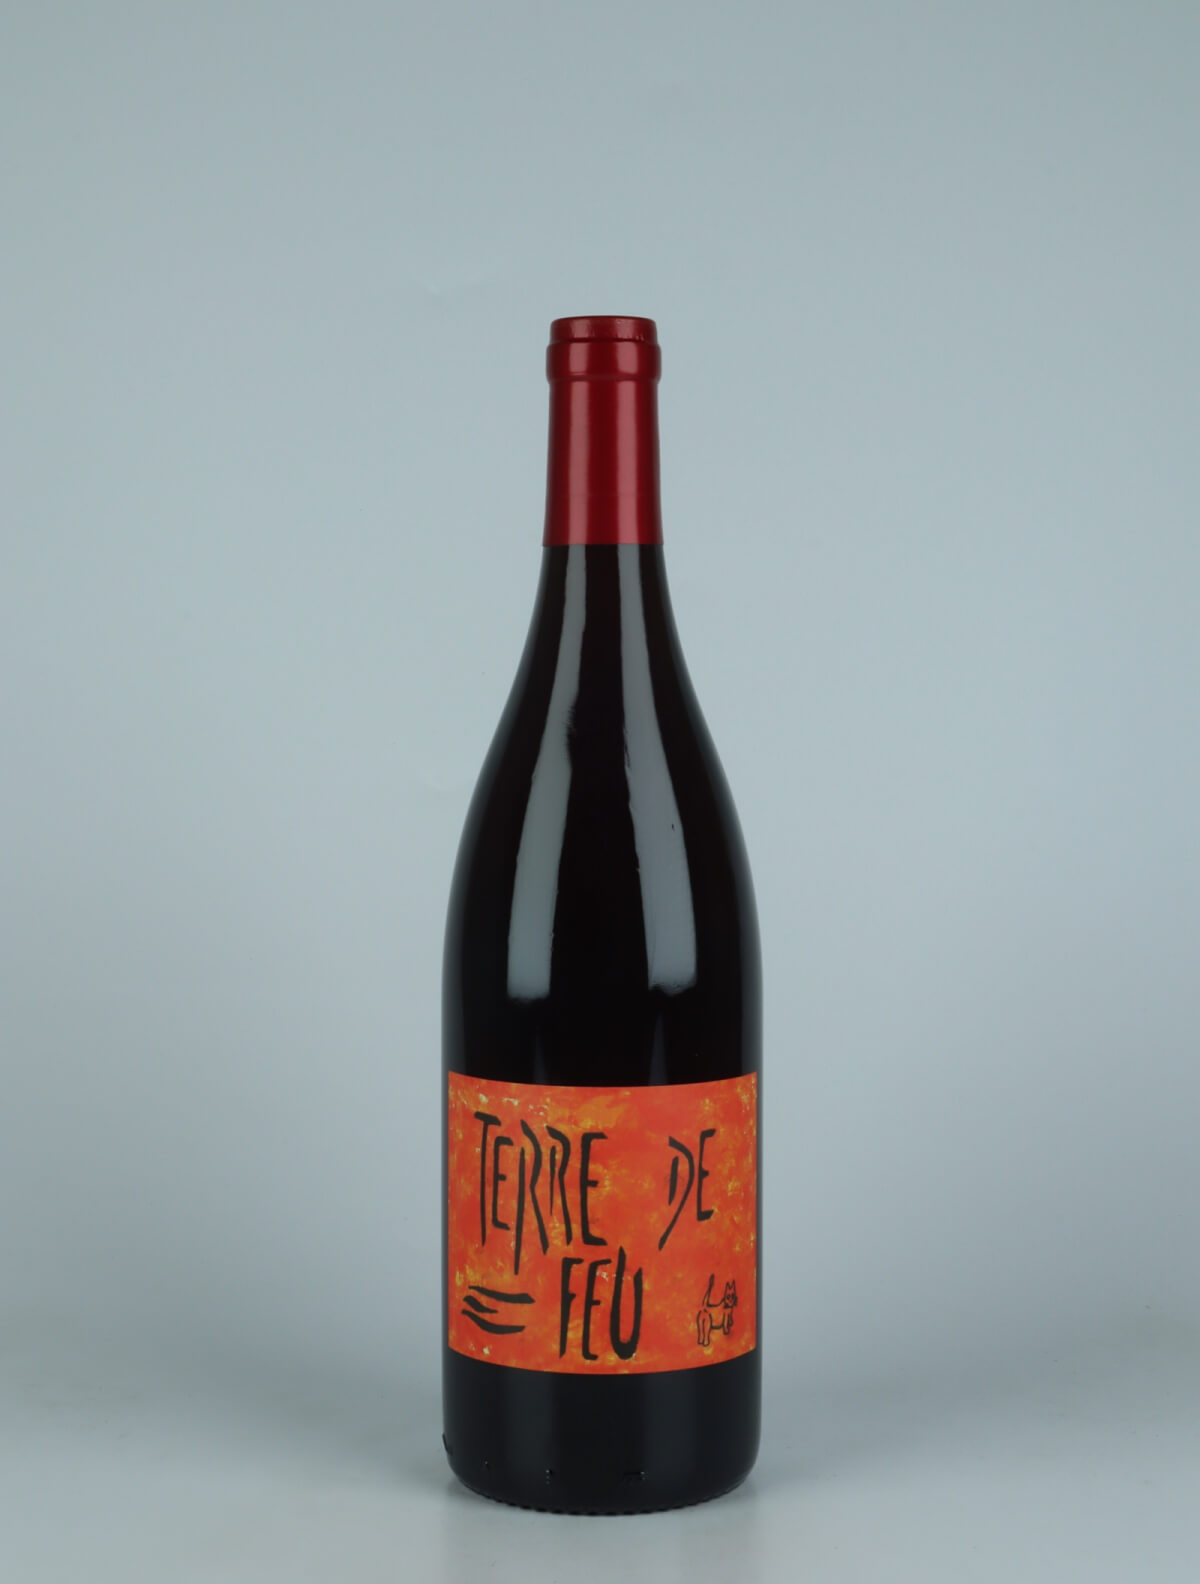 A bottle 2023 Terre de Feu Rouge Red wine from Les Foulards Rouges, Languedoc in France